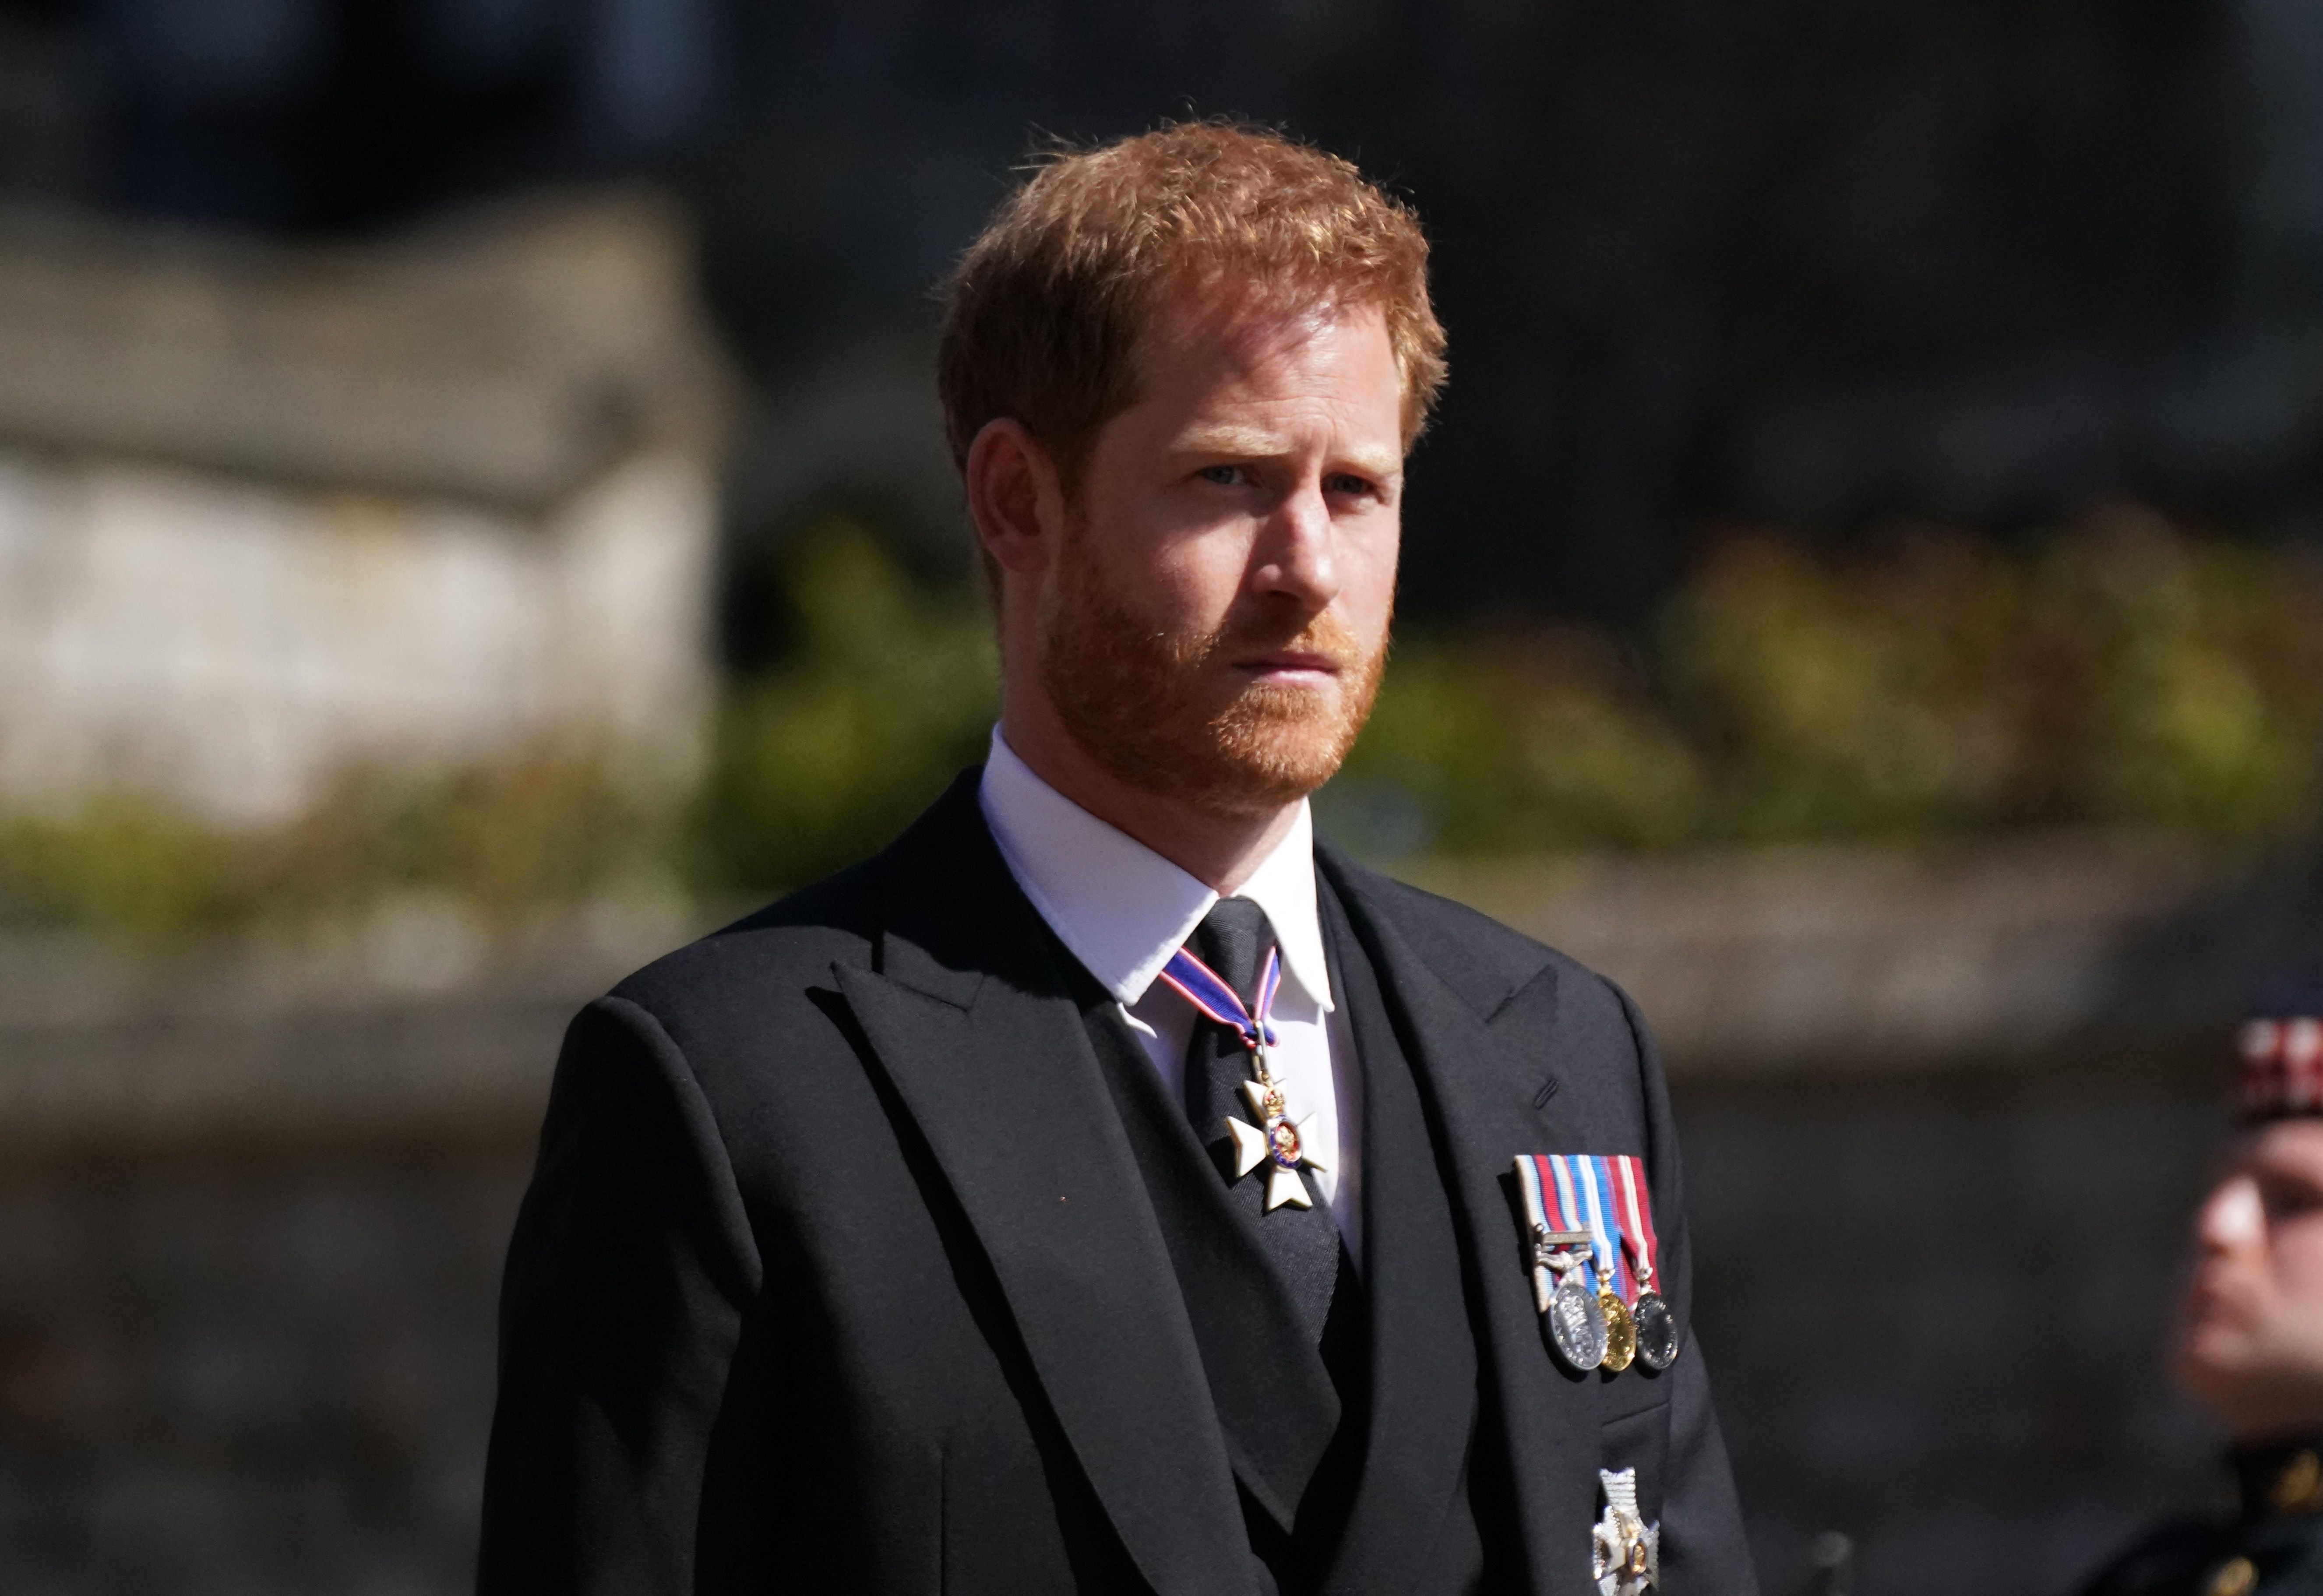 Britain's Prince Harry, Duke of Sussex walks during the funeral procession of Britain's Prince Philip, Duke of Edinburgh to St George's Chapel in Windsor Castle in Windsor, west of London, on April 17, 2021. | Getty Images